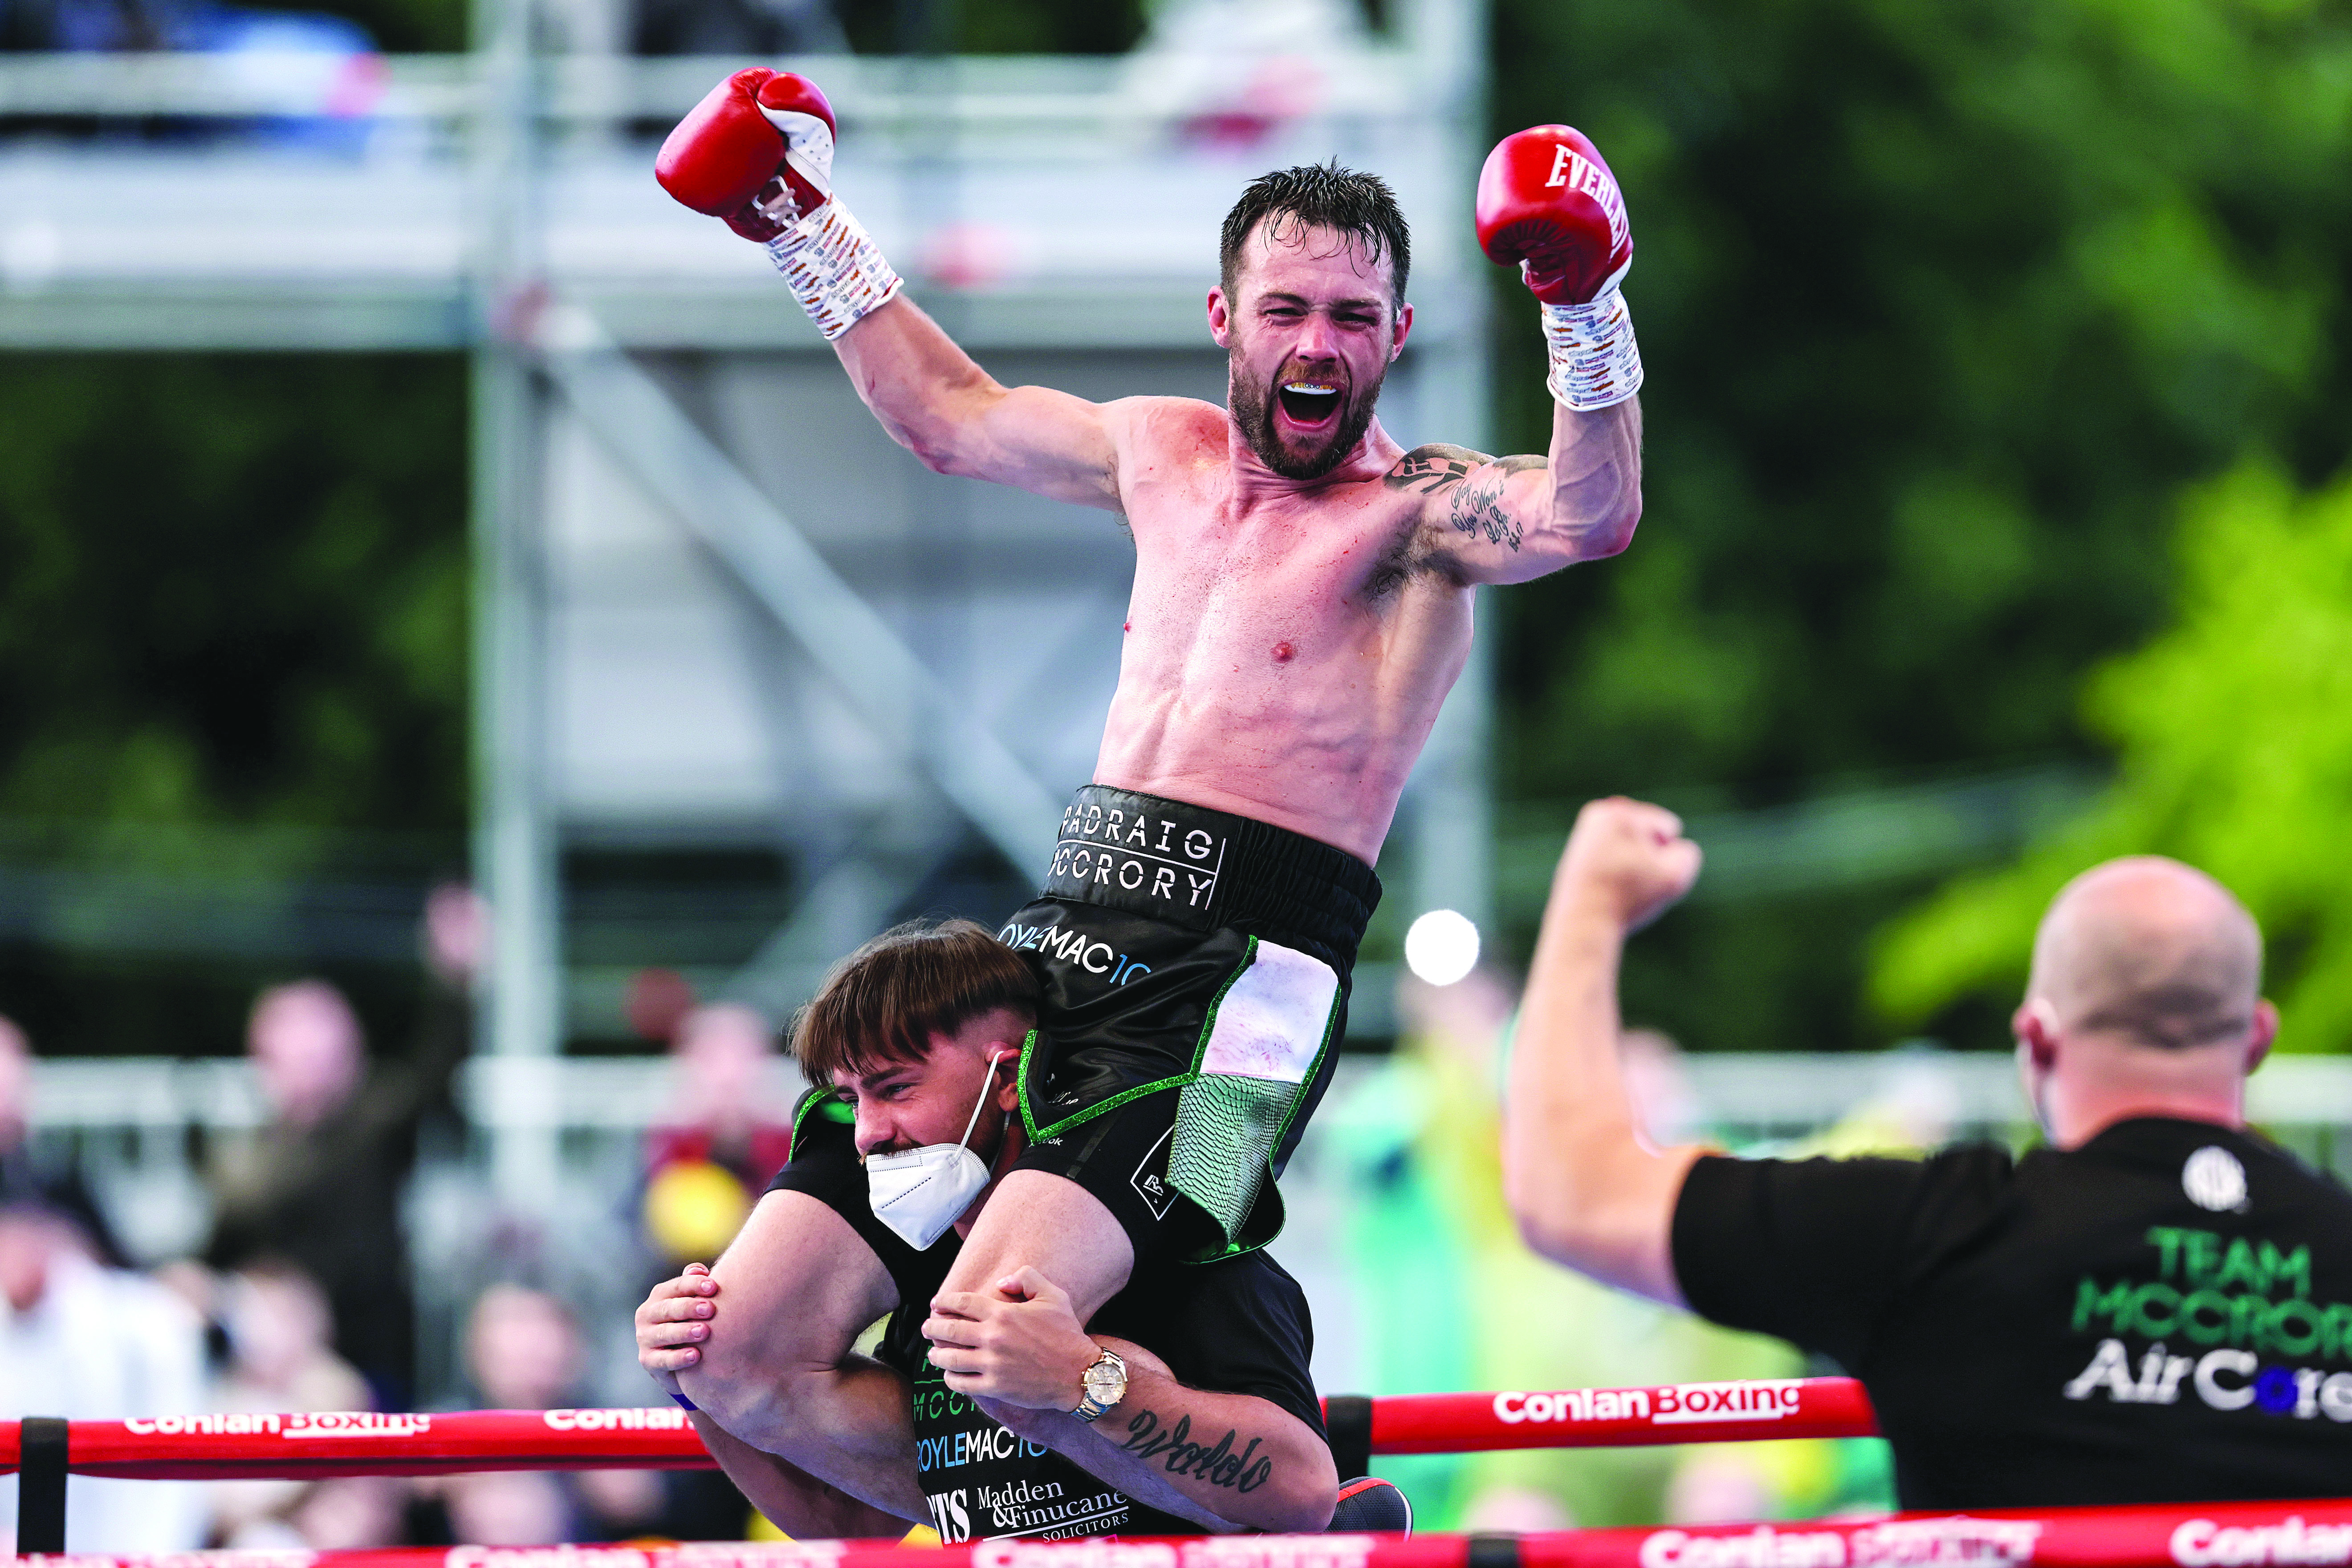 Padraig McCrory didn’t have to think twice when offered a fight against former world title Marco Antonio Periban despite an EU title virtually assured next